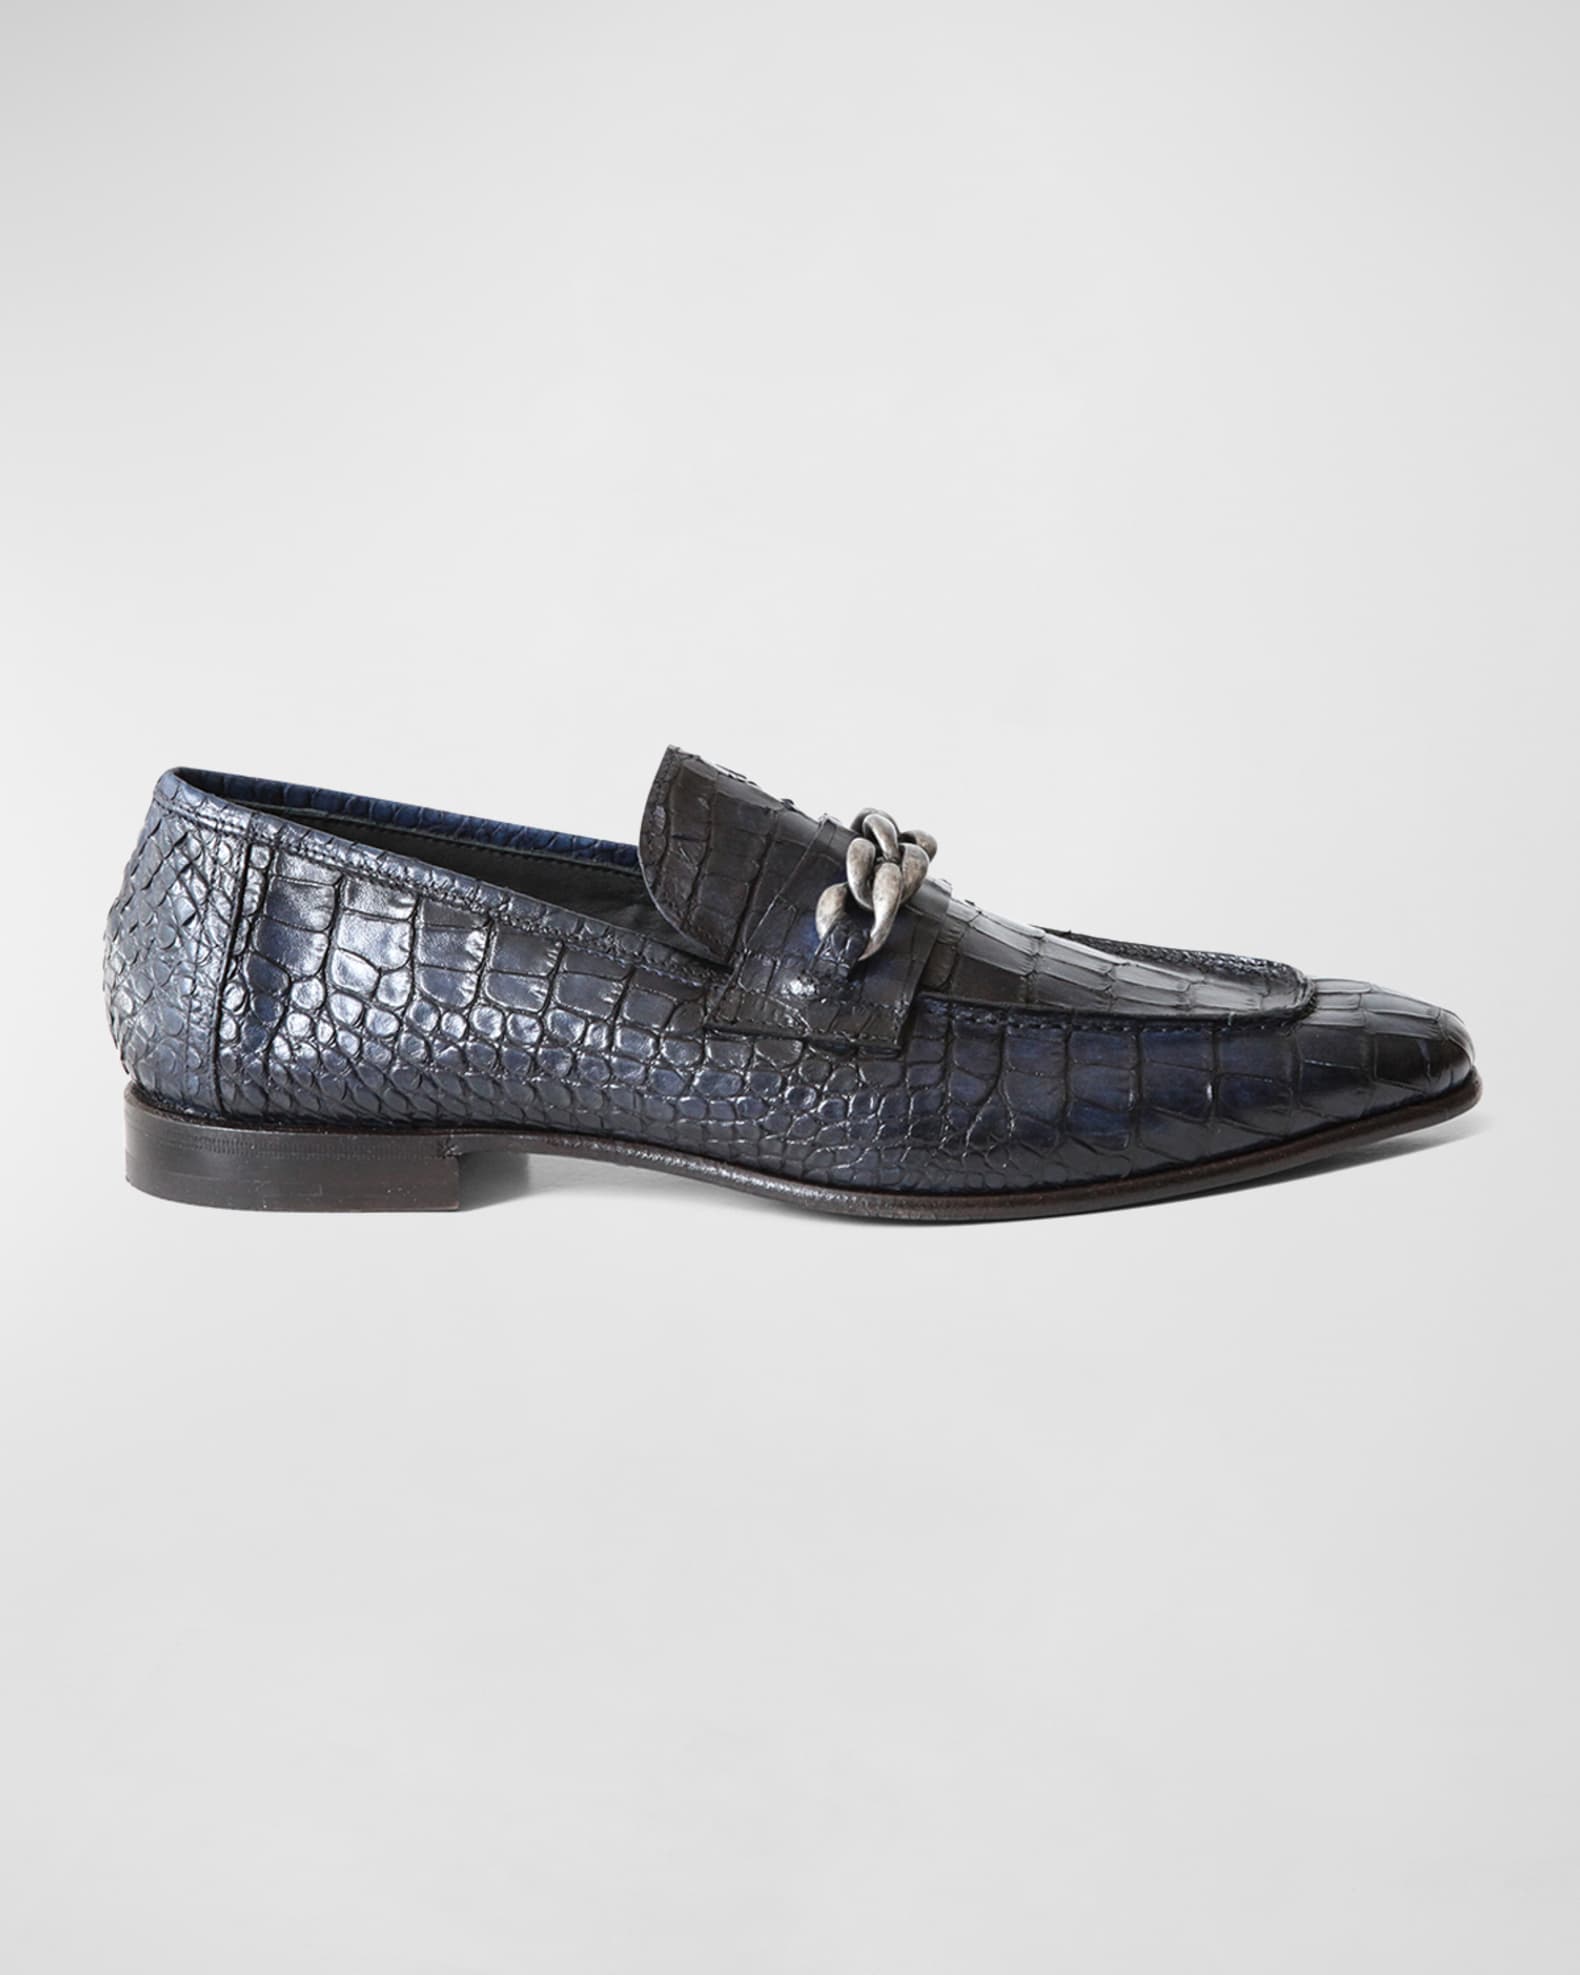 Jo Ghost Men's Croc-Printed Leather Chain Loafers | Neiman Marcus